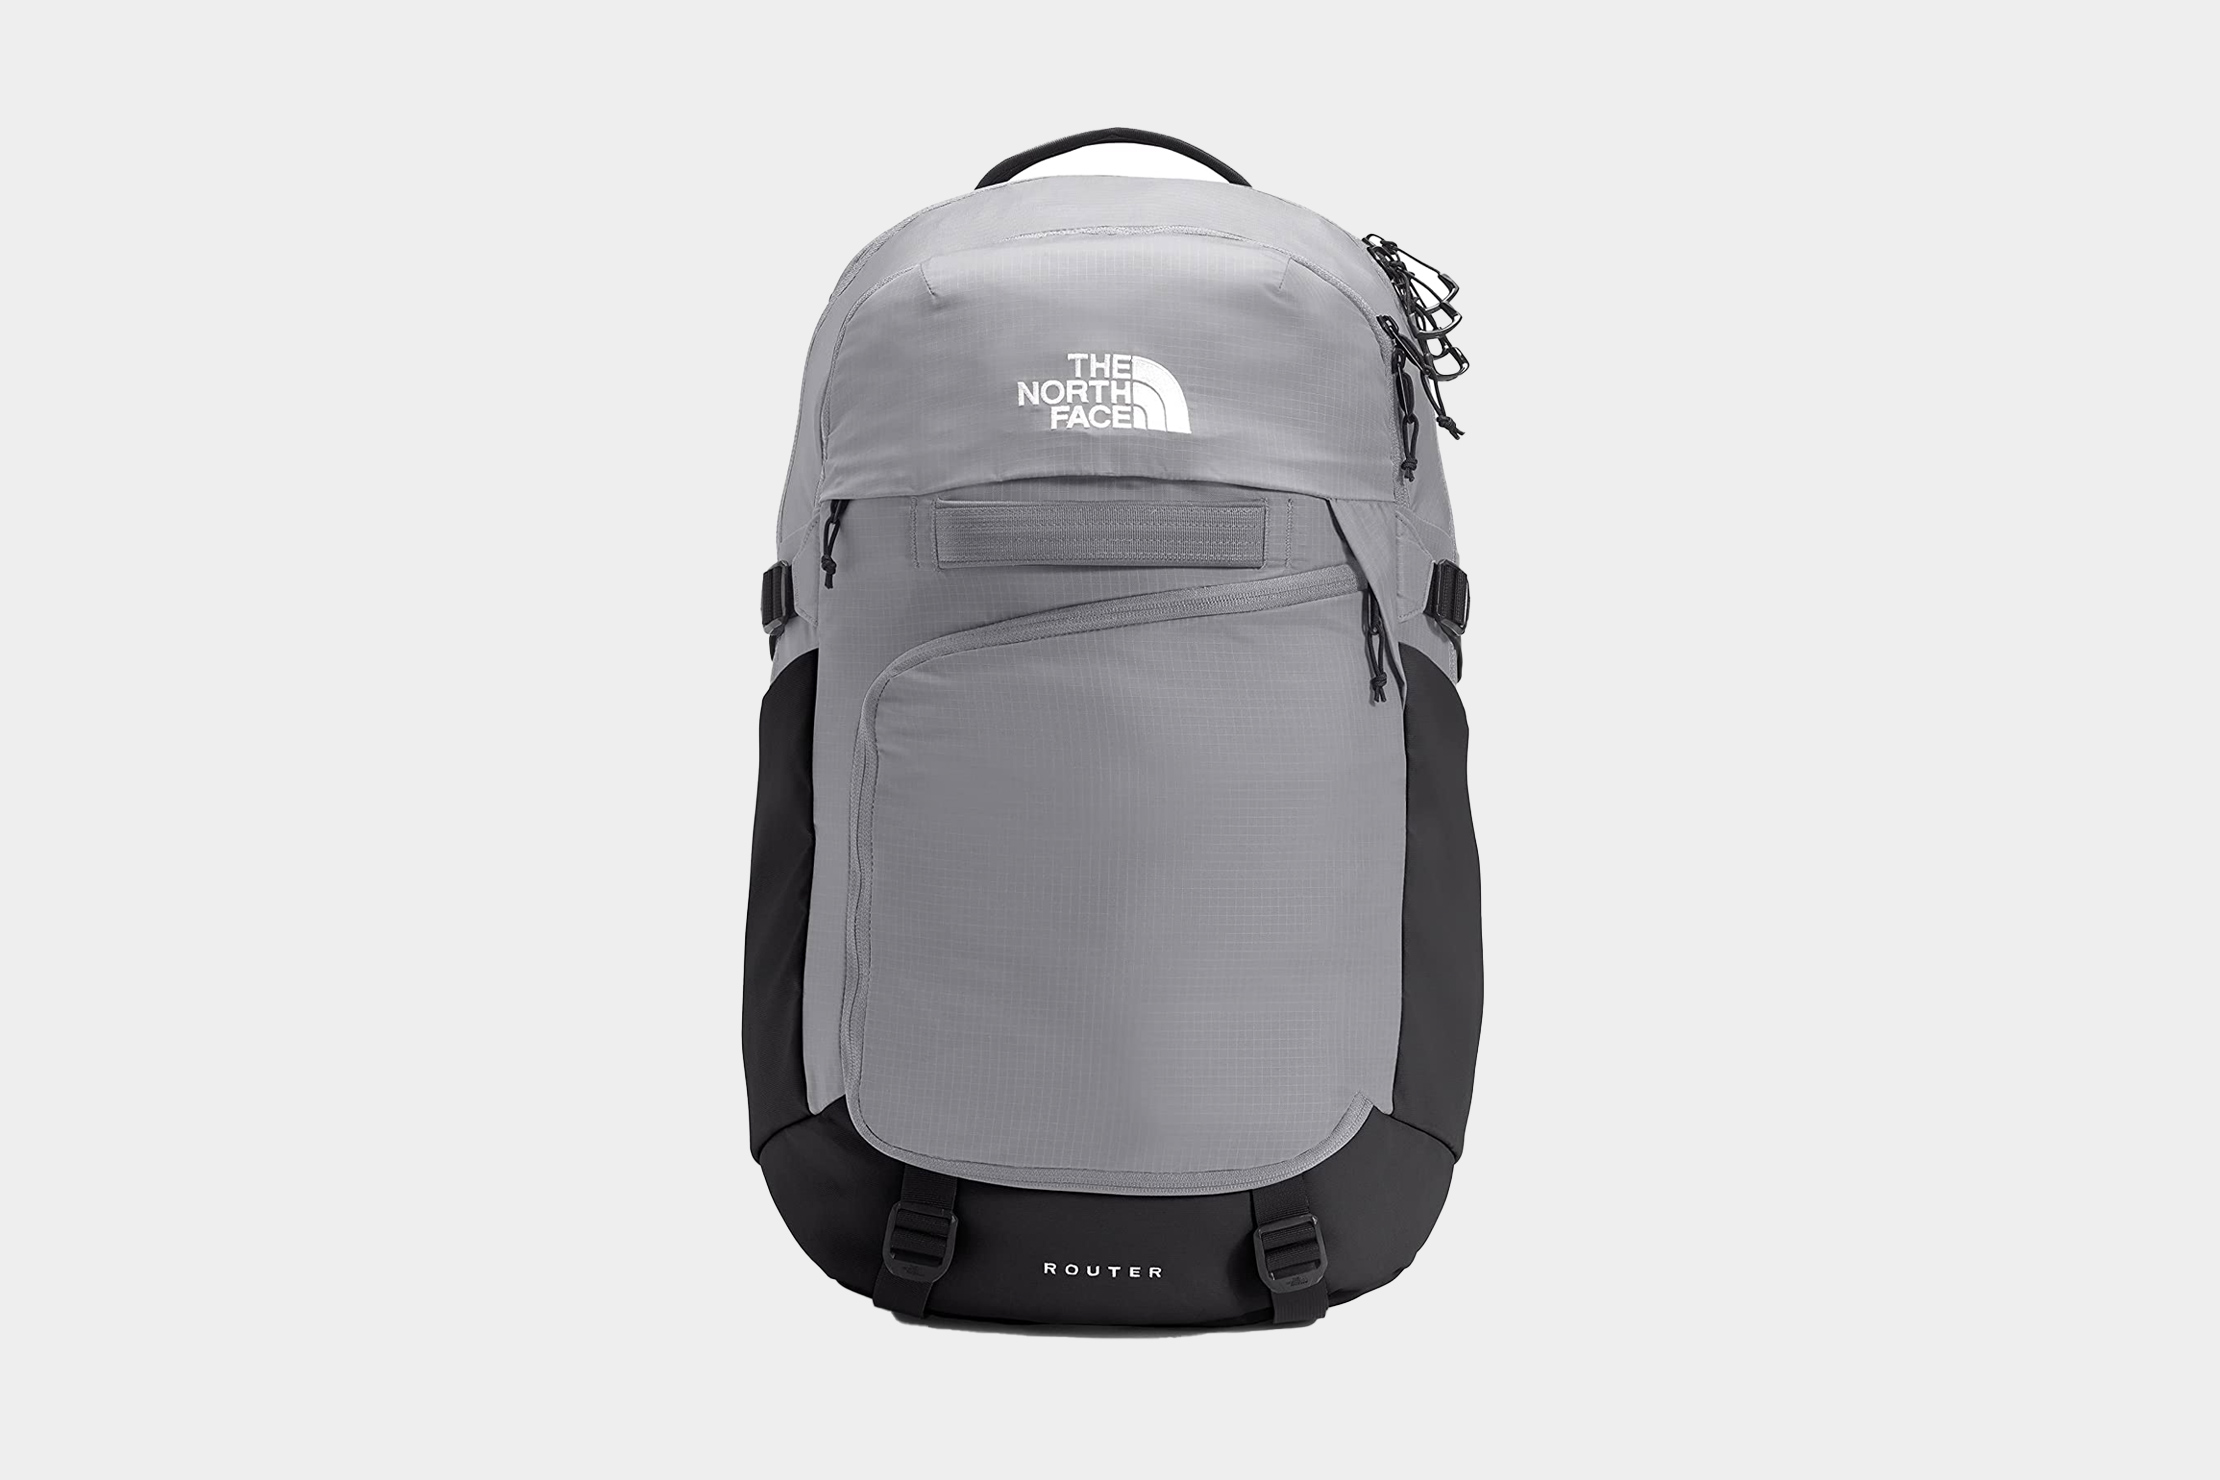 Pelagisch Gek Imperialisme The North Face Router Backpack Review | Pack Hacker